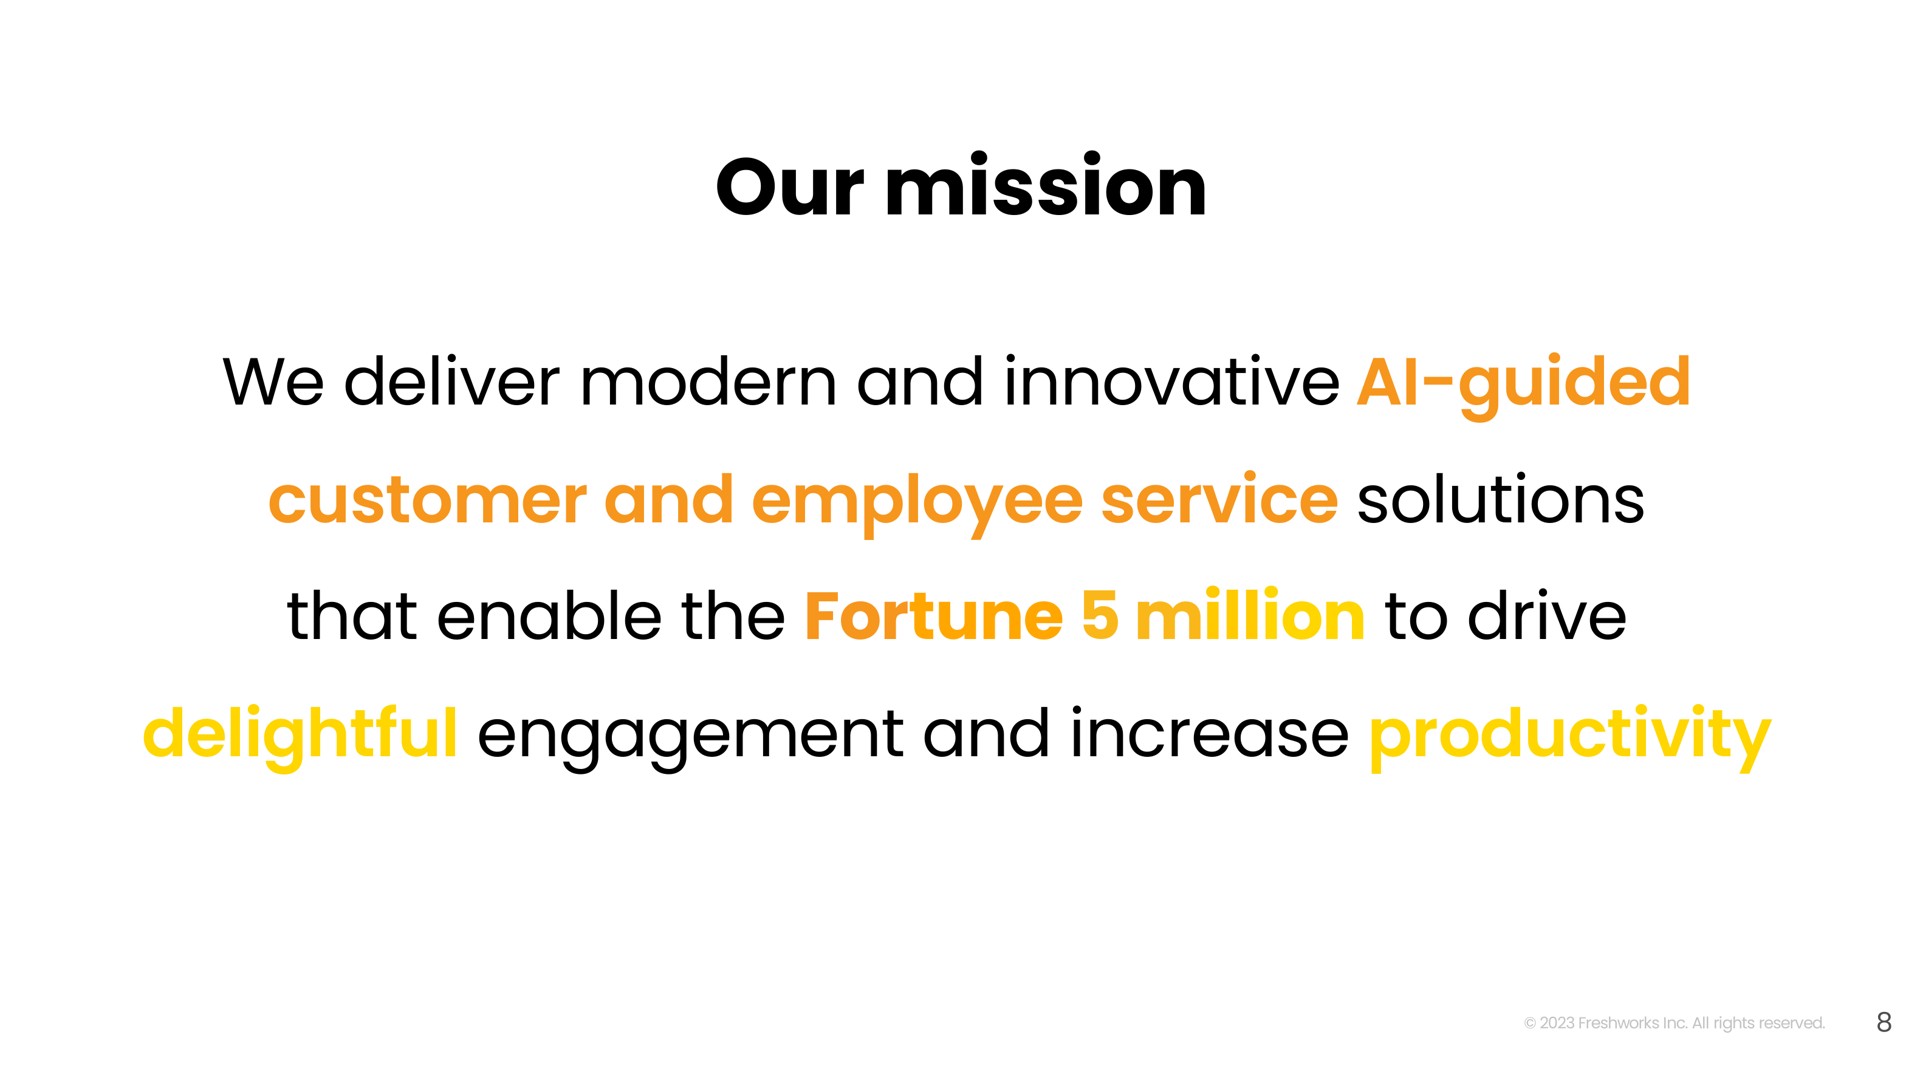 our mission we deliver modern and innovative guided customer and employee service solutions that enable the fortune million to drive delightful engagement and increase productivity | Freshworks